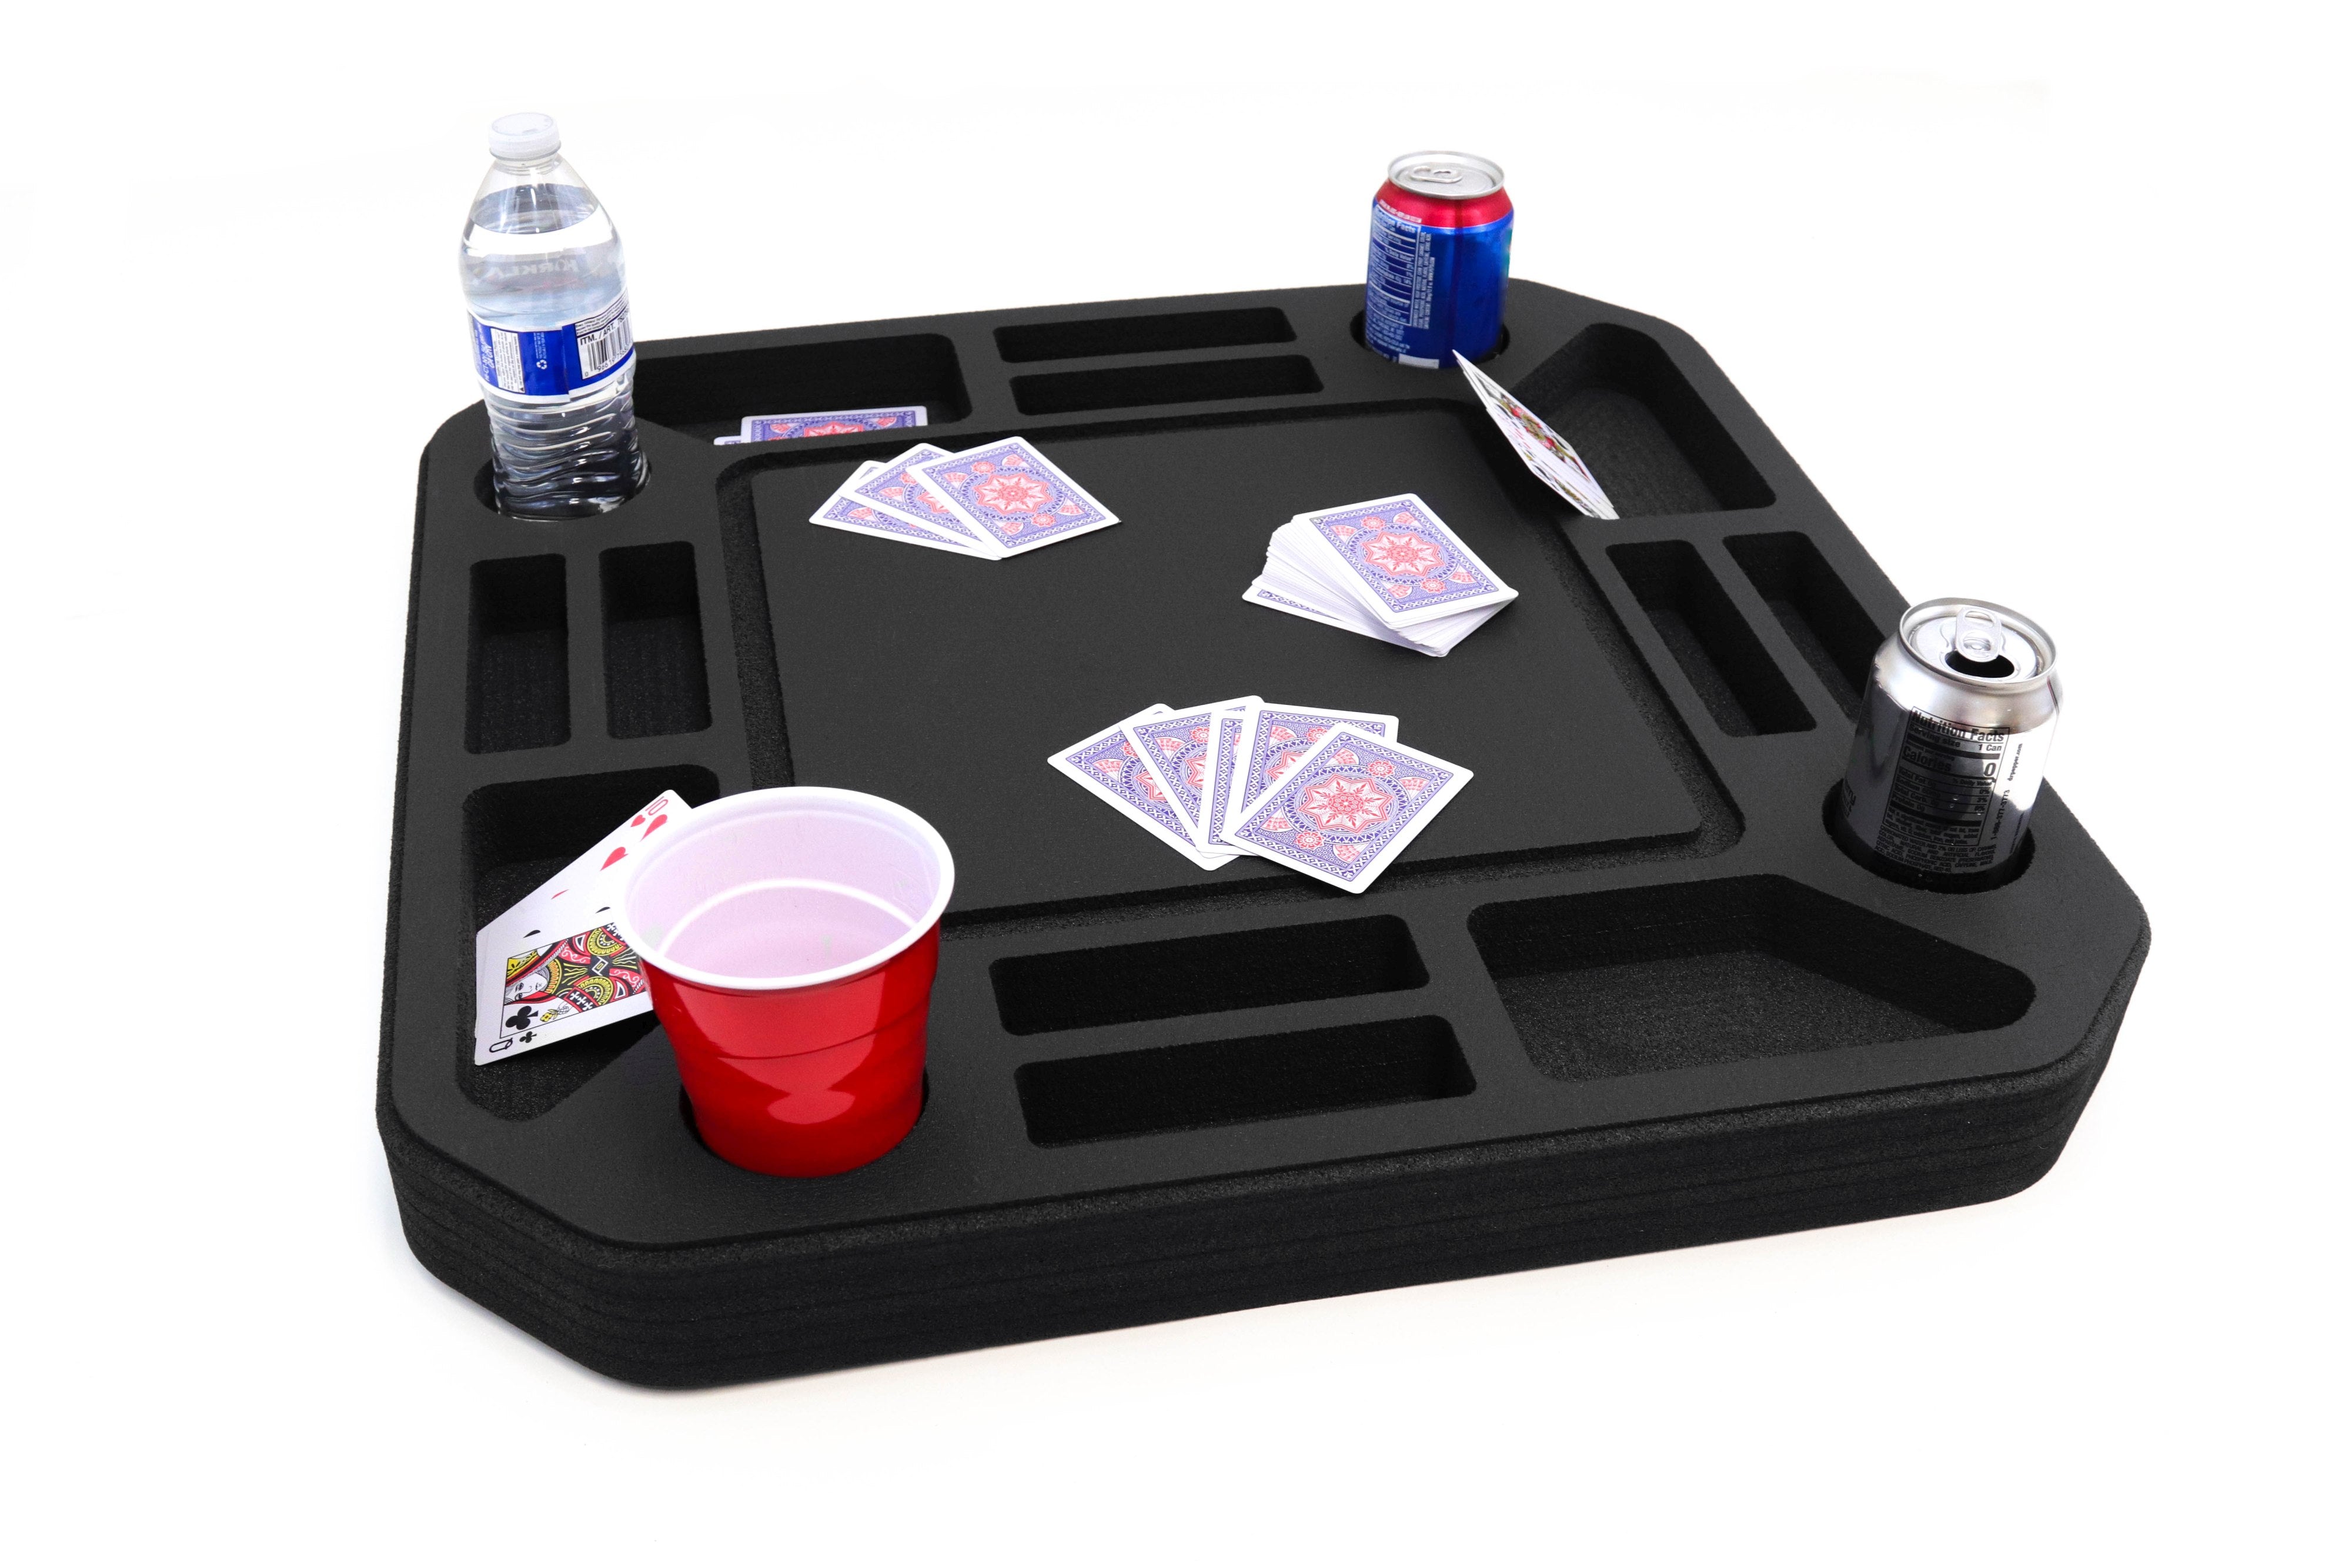 Floating Medium Poker Table Game Tray for Pool or Beach Party Float Lounge Durable Foam 23.5 Inch Chip Slots Drink Holders